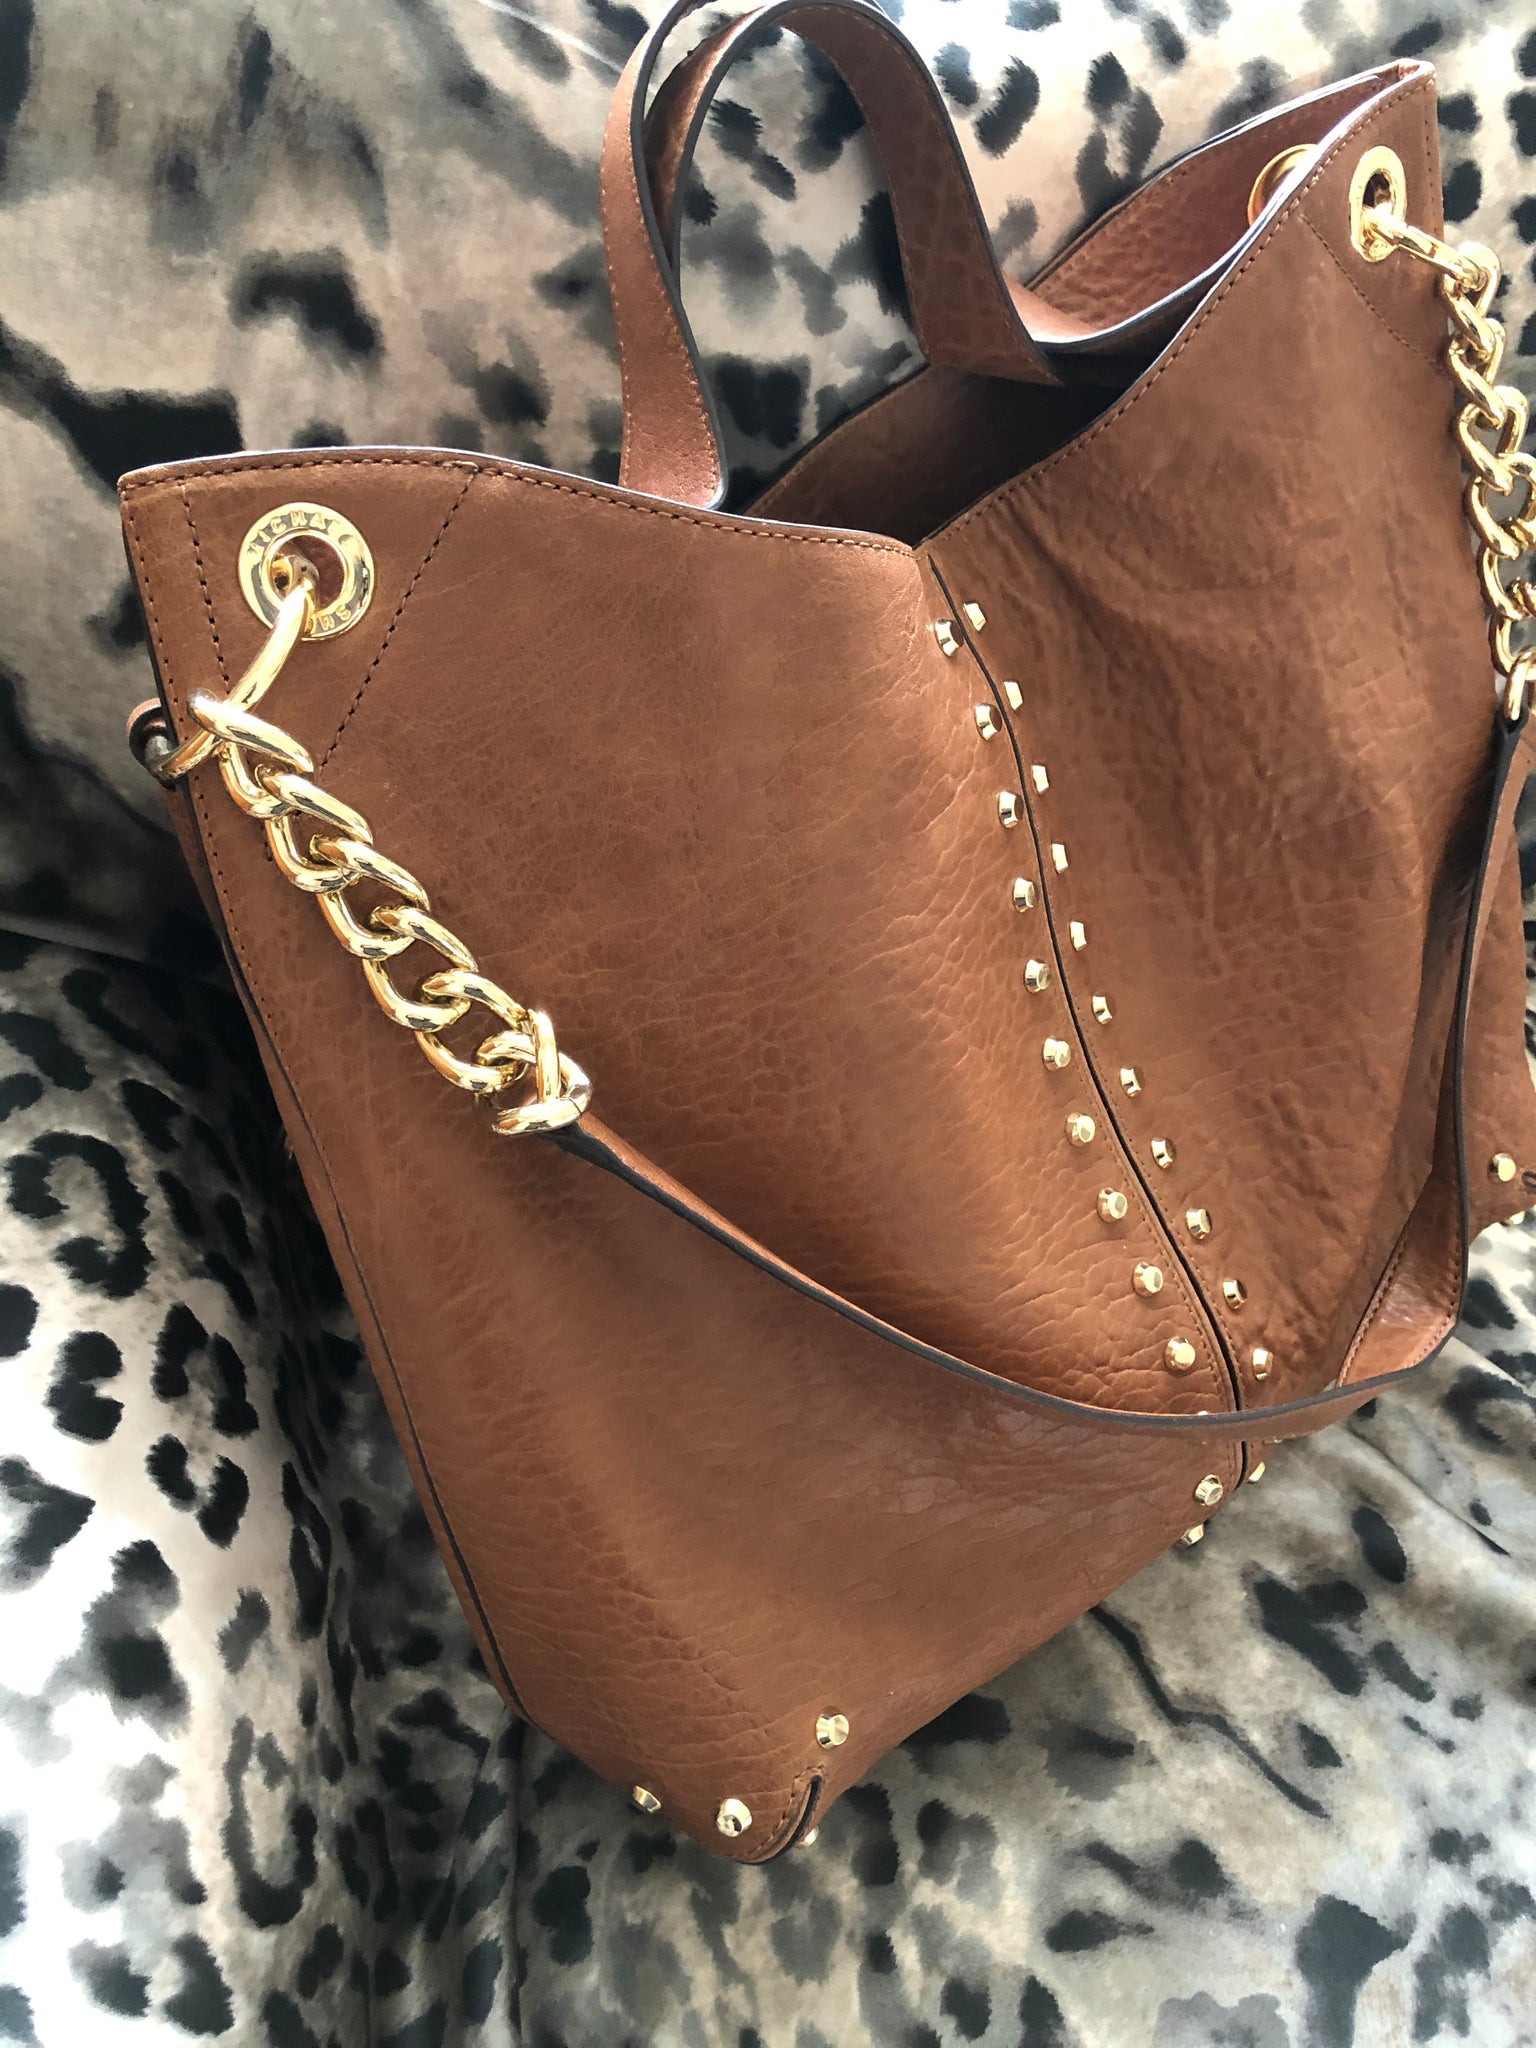 consignment bag - Michael Kors, large brown tote – ...and, all things nice!  By JSP